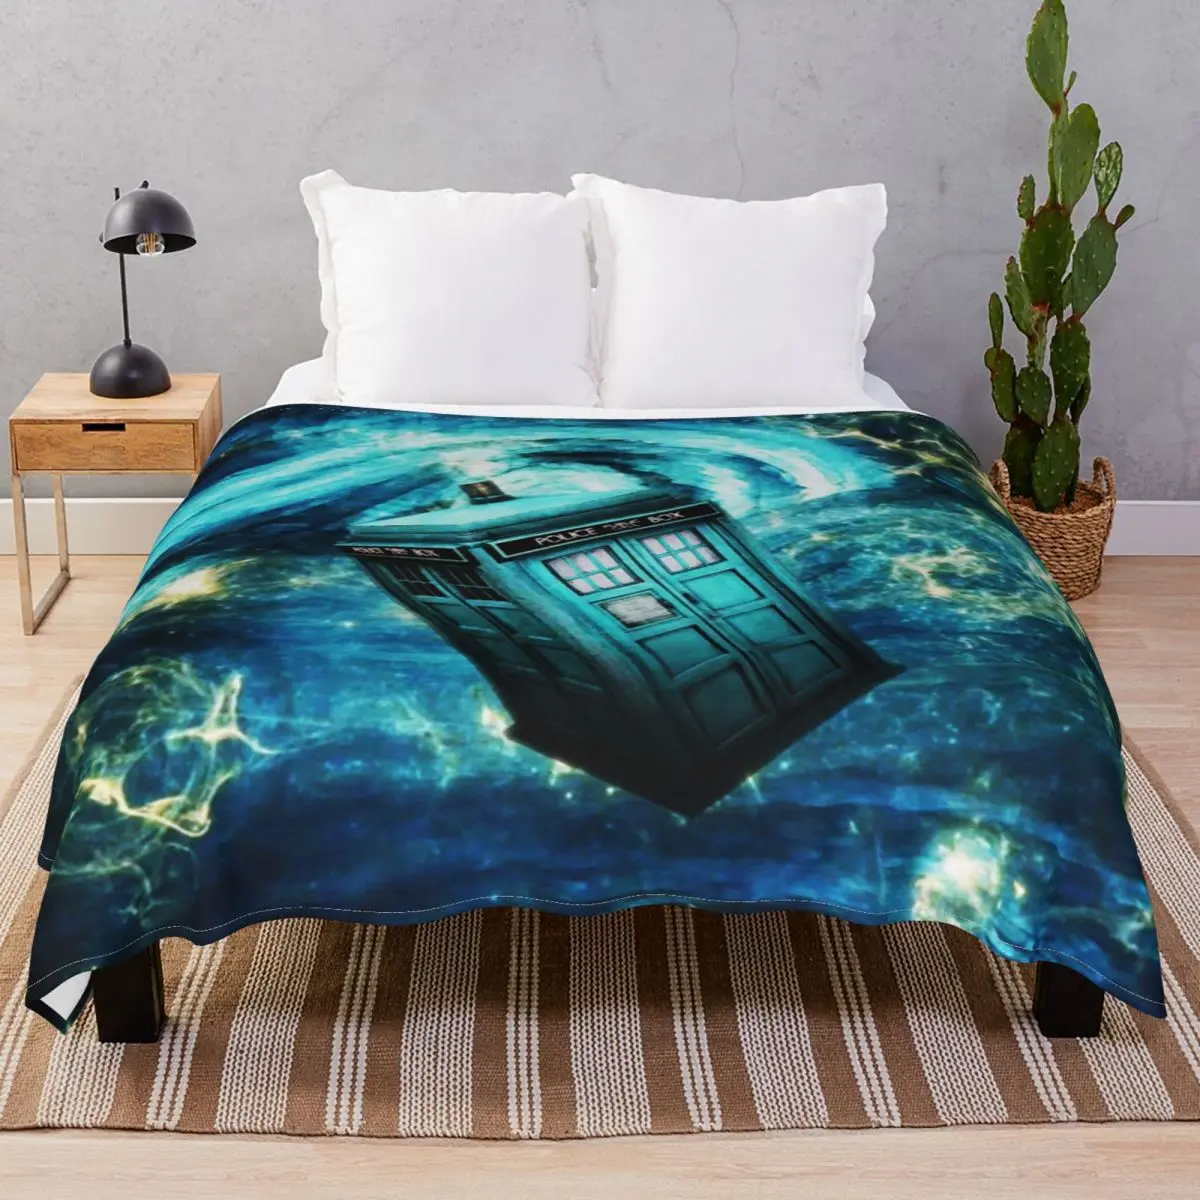 The Starry Night Blankets Flannel Autumn/Winter Soft Unisex Throw Blanket for Bed Home Couch Camp Office